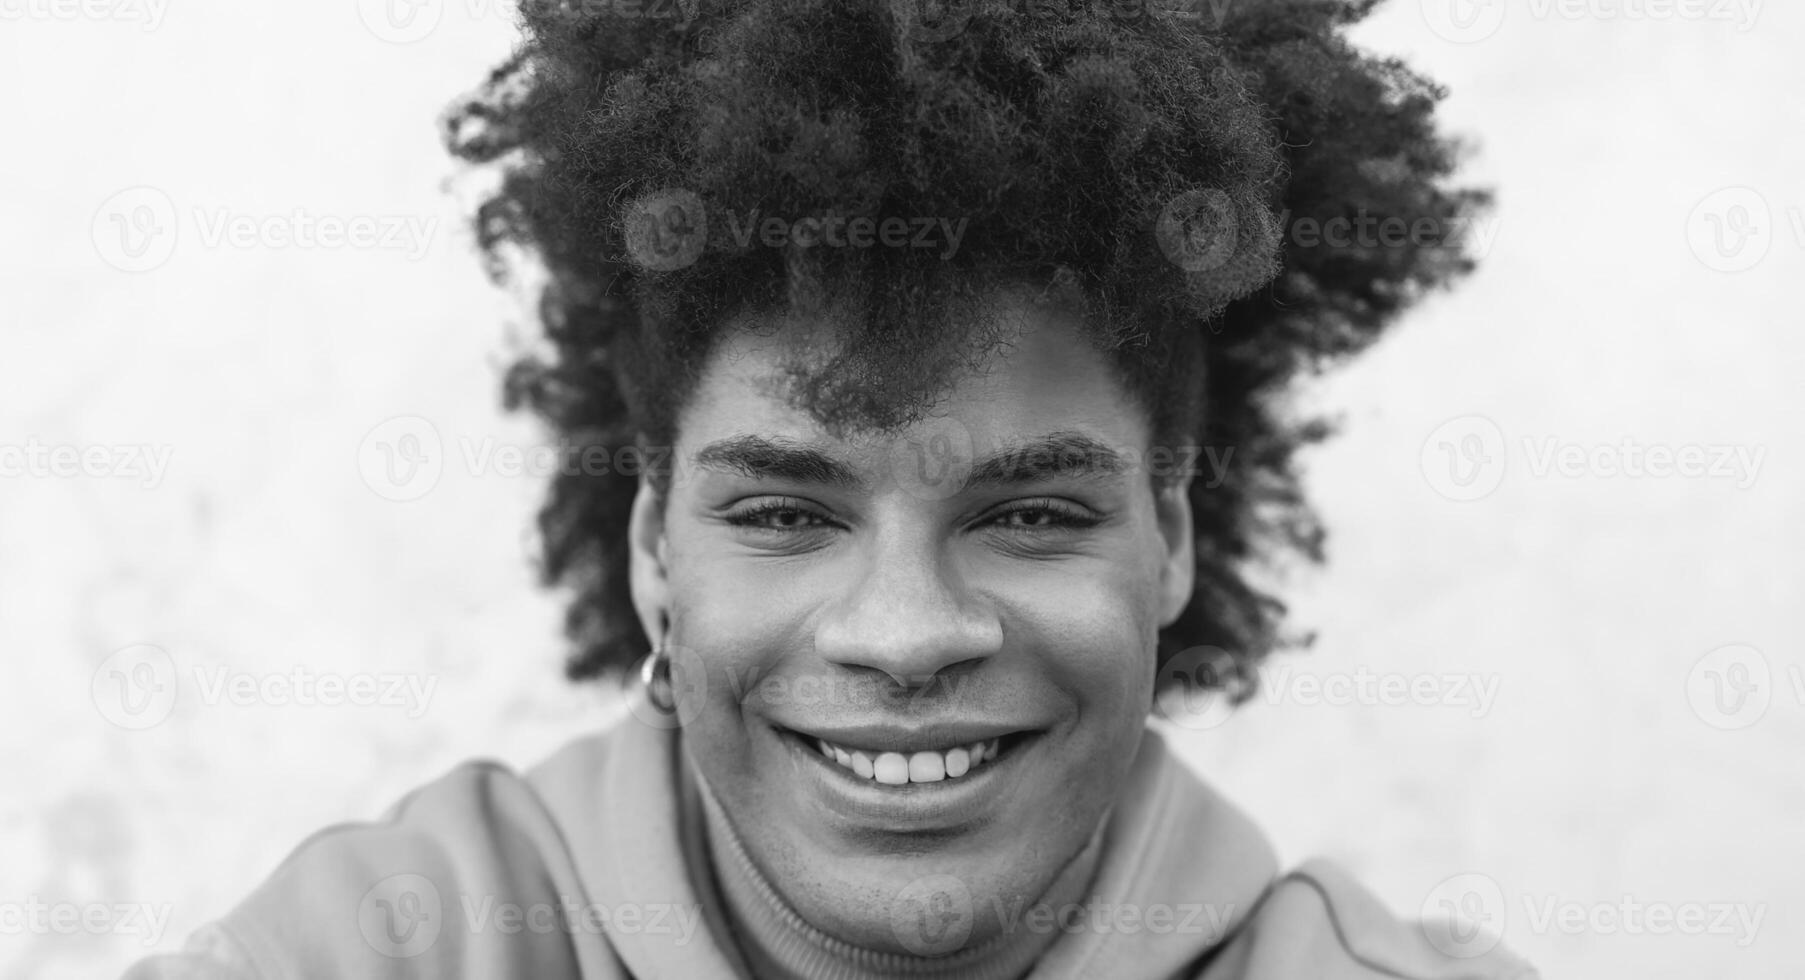 Afro smiling man portrait - Mixed race young guy with curly hair posing in front camera - Youth millennial generation culture and multi ethnic people concept - Black and white editing photo